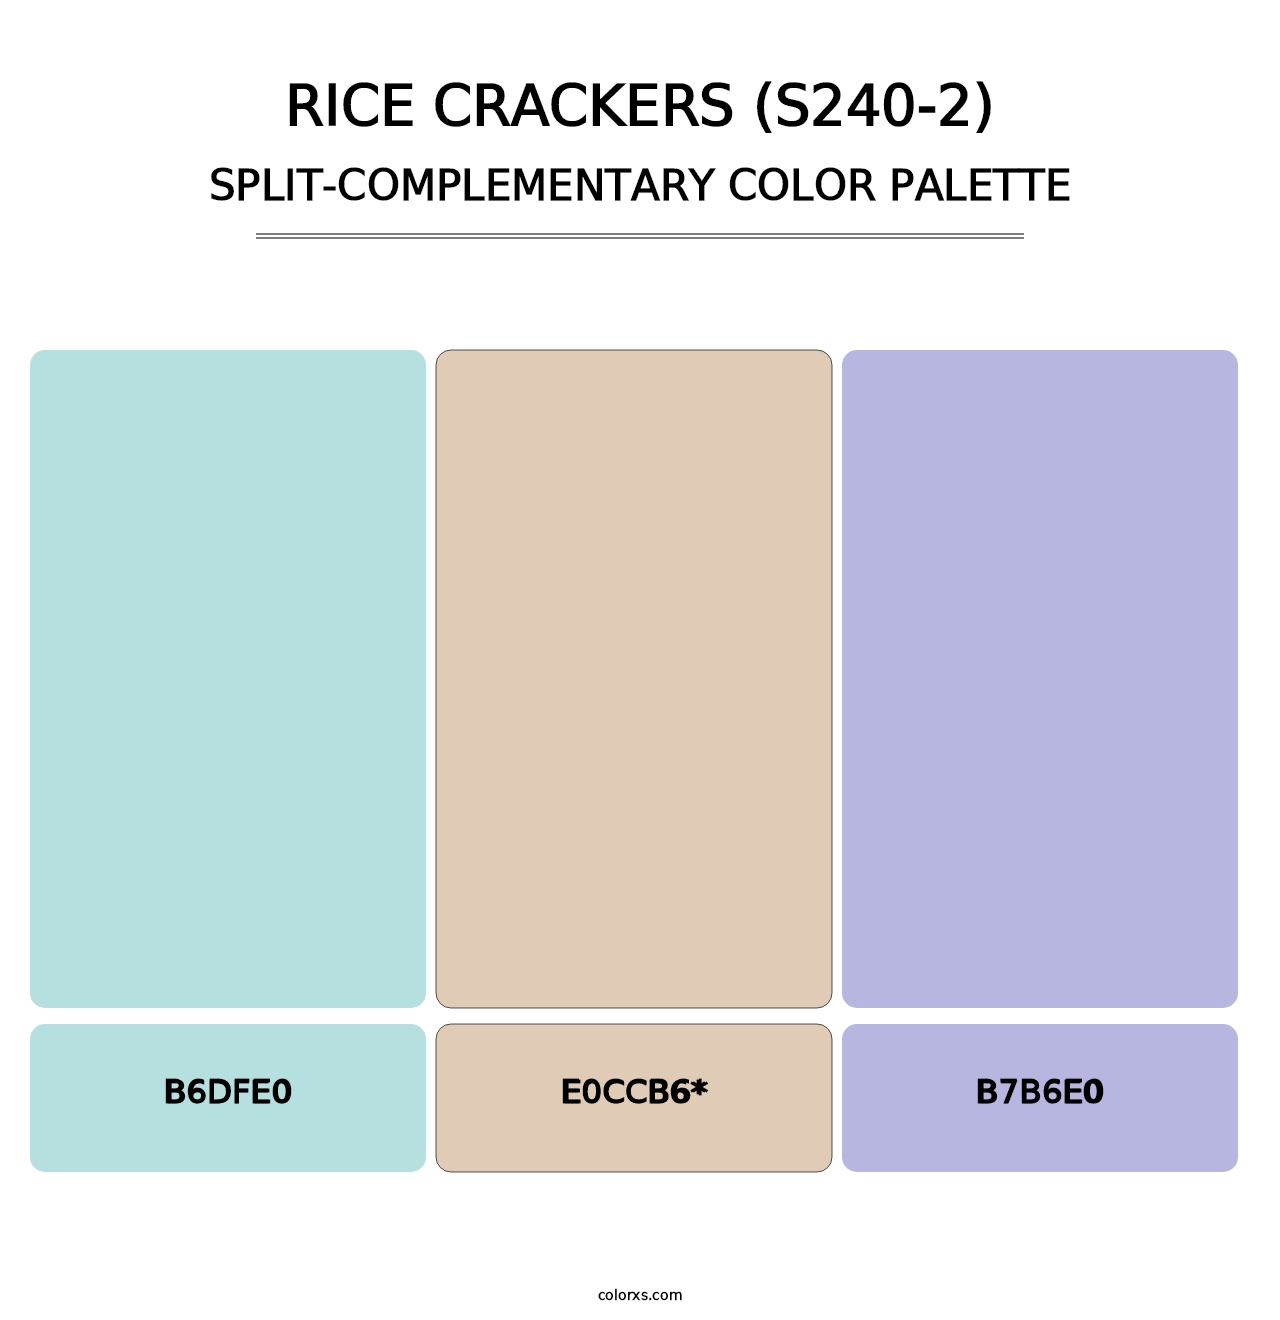 Rice Crackers (S240-2) - Split-Complementary Color Palette